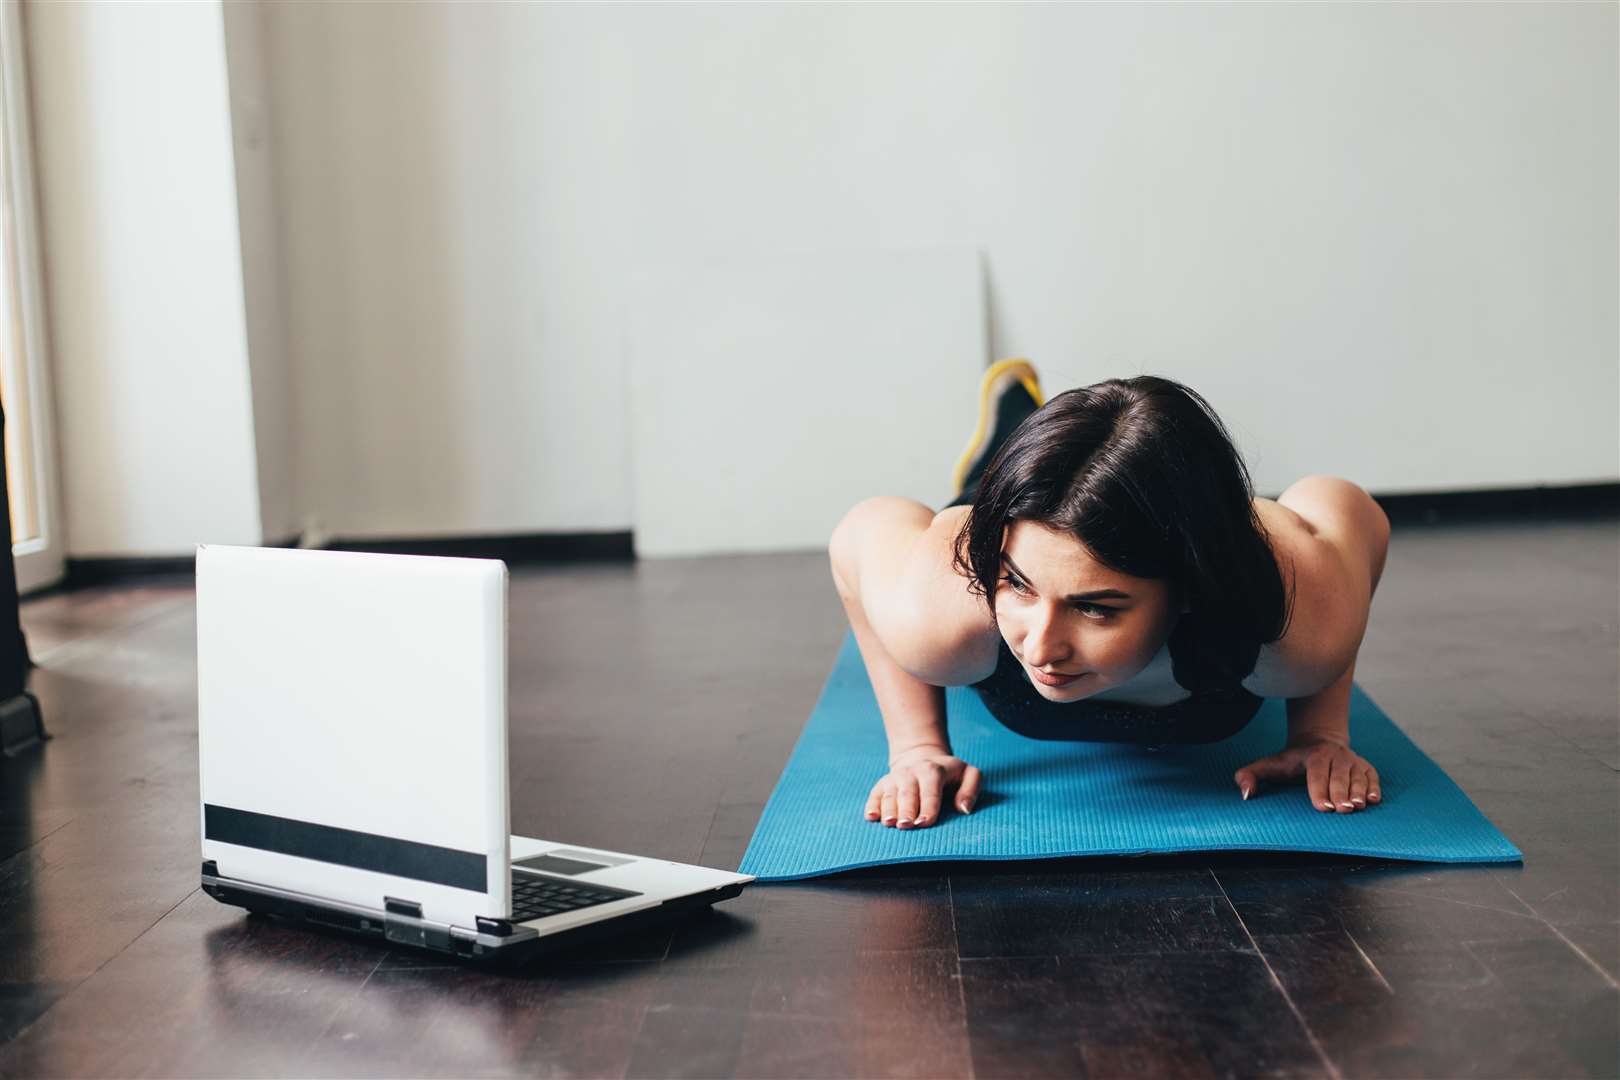 There are lots of online exercise classes you can try out while at home.